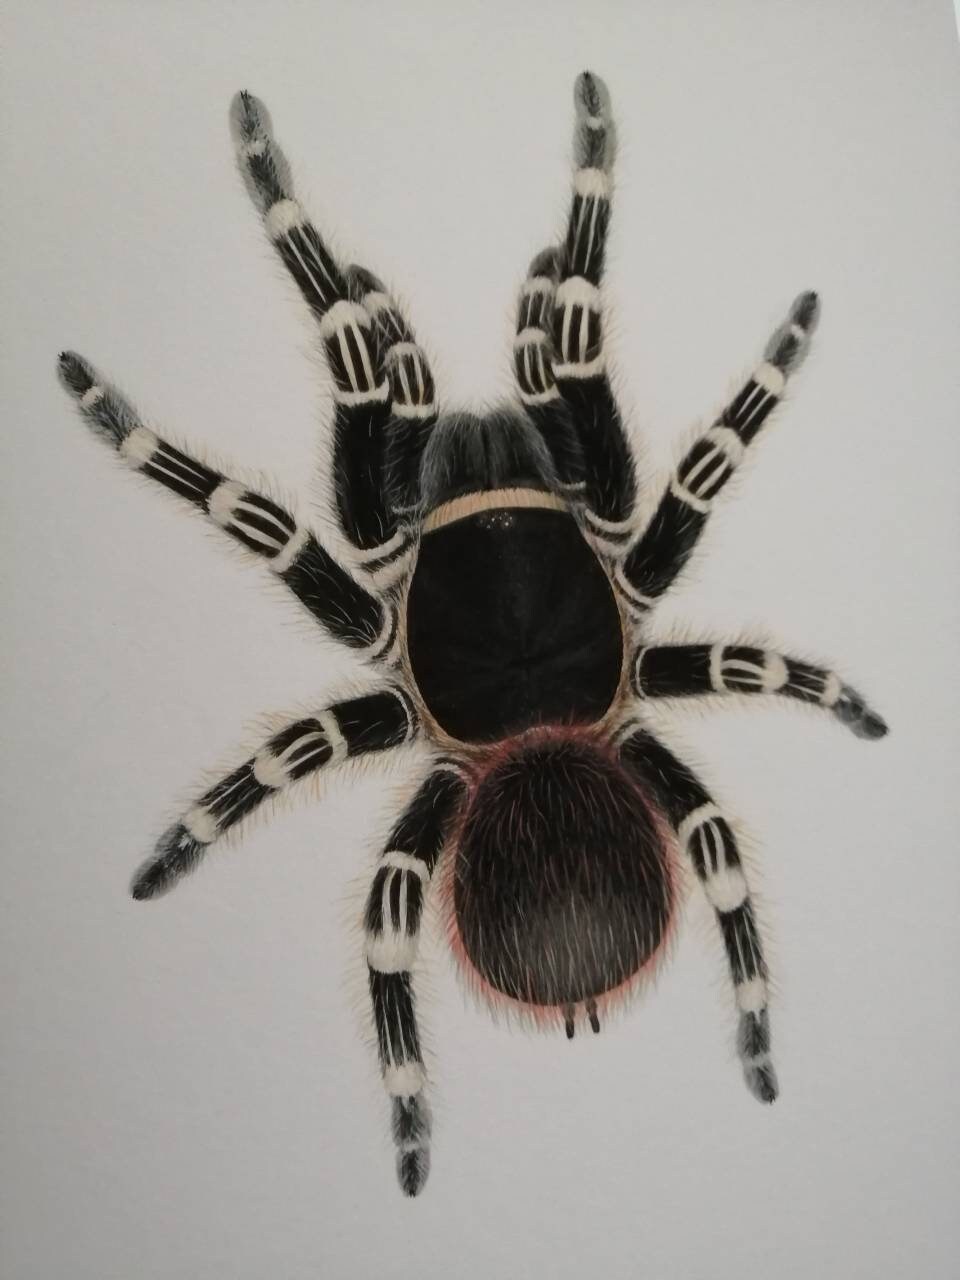 Giant White Knee, Acanthoscurria geniculata. Limited edition A4 size art print